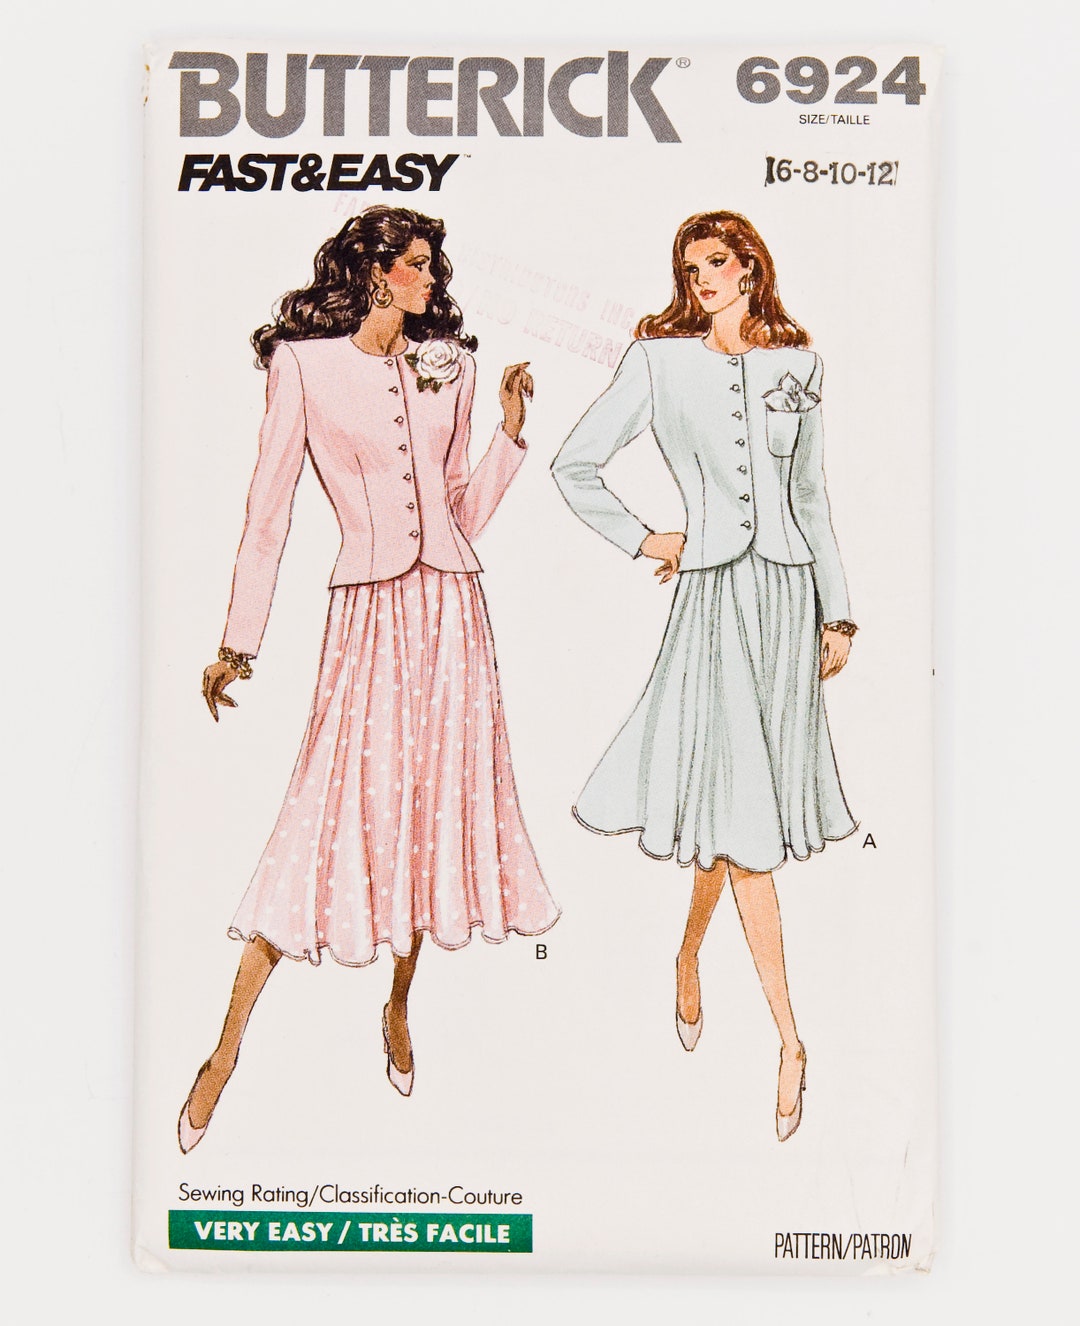 Butterick Sewing Pattern 6924 Vintage Pattern Easy to Sew - Etsy UK